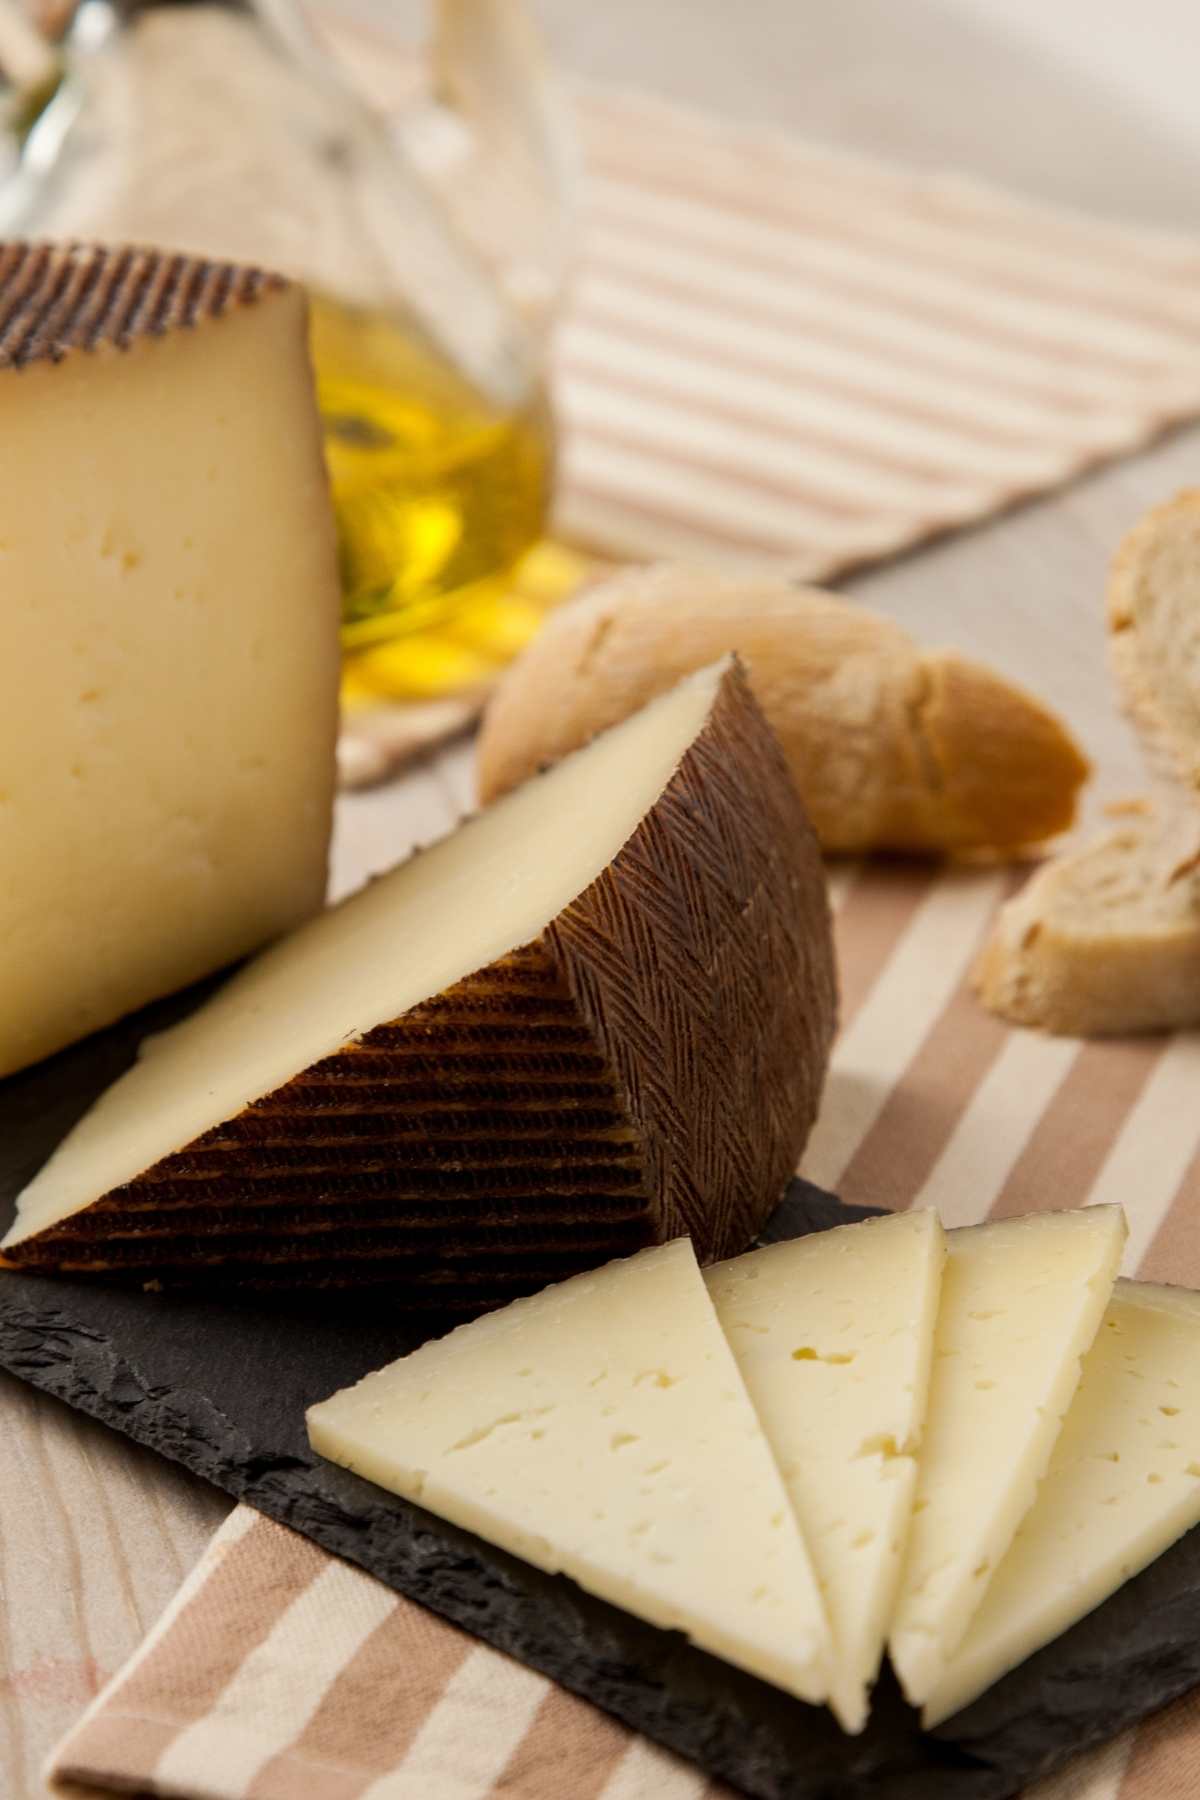 Originally from Spain, Manchego is a white cheese made from sheep's milk. It’s a very versatile cheese that can be used to top burgers, add flavor to salads, and is delicious melted in sandwiches.